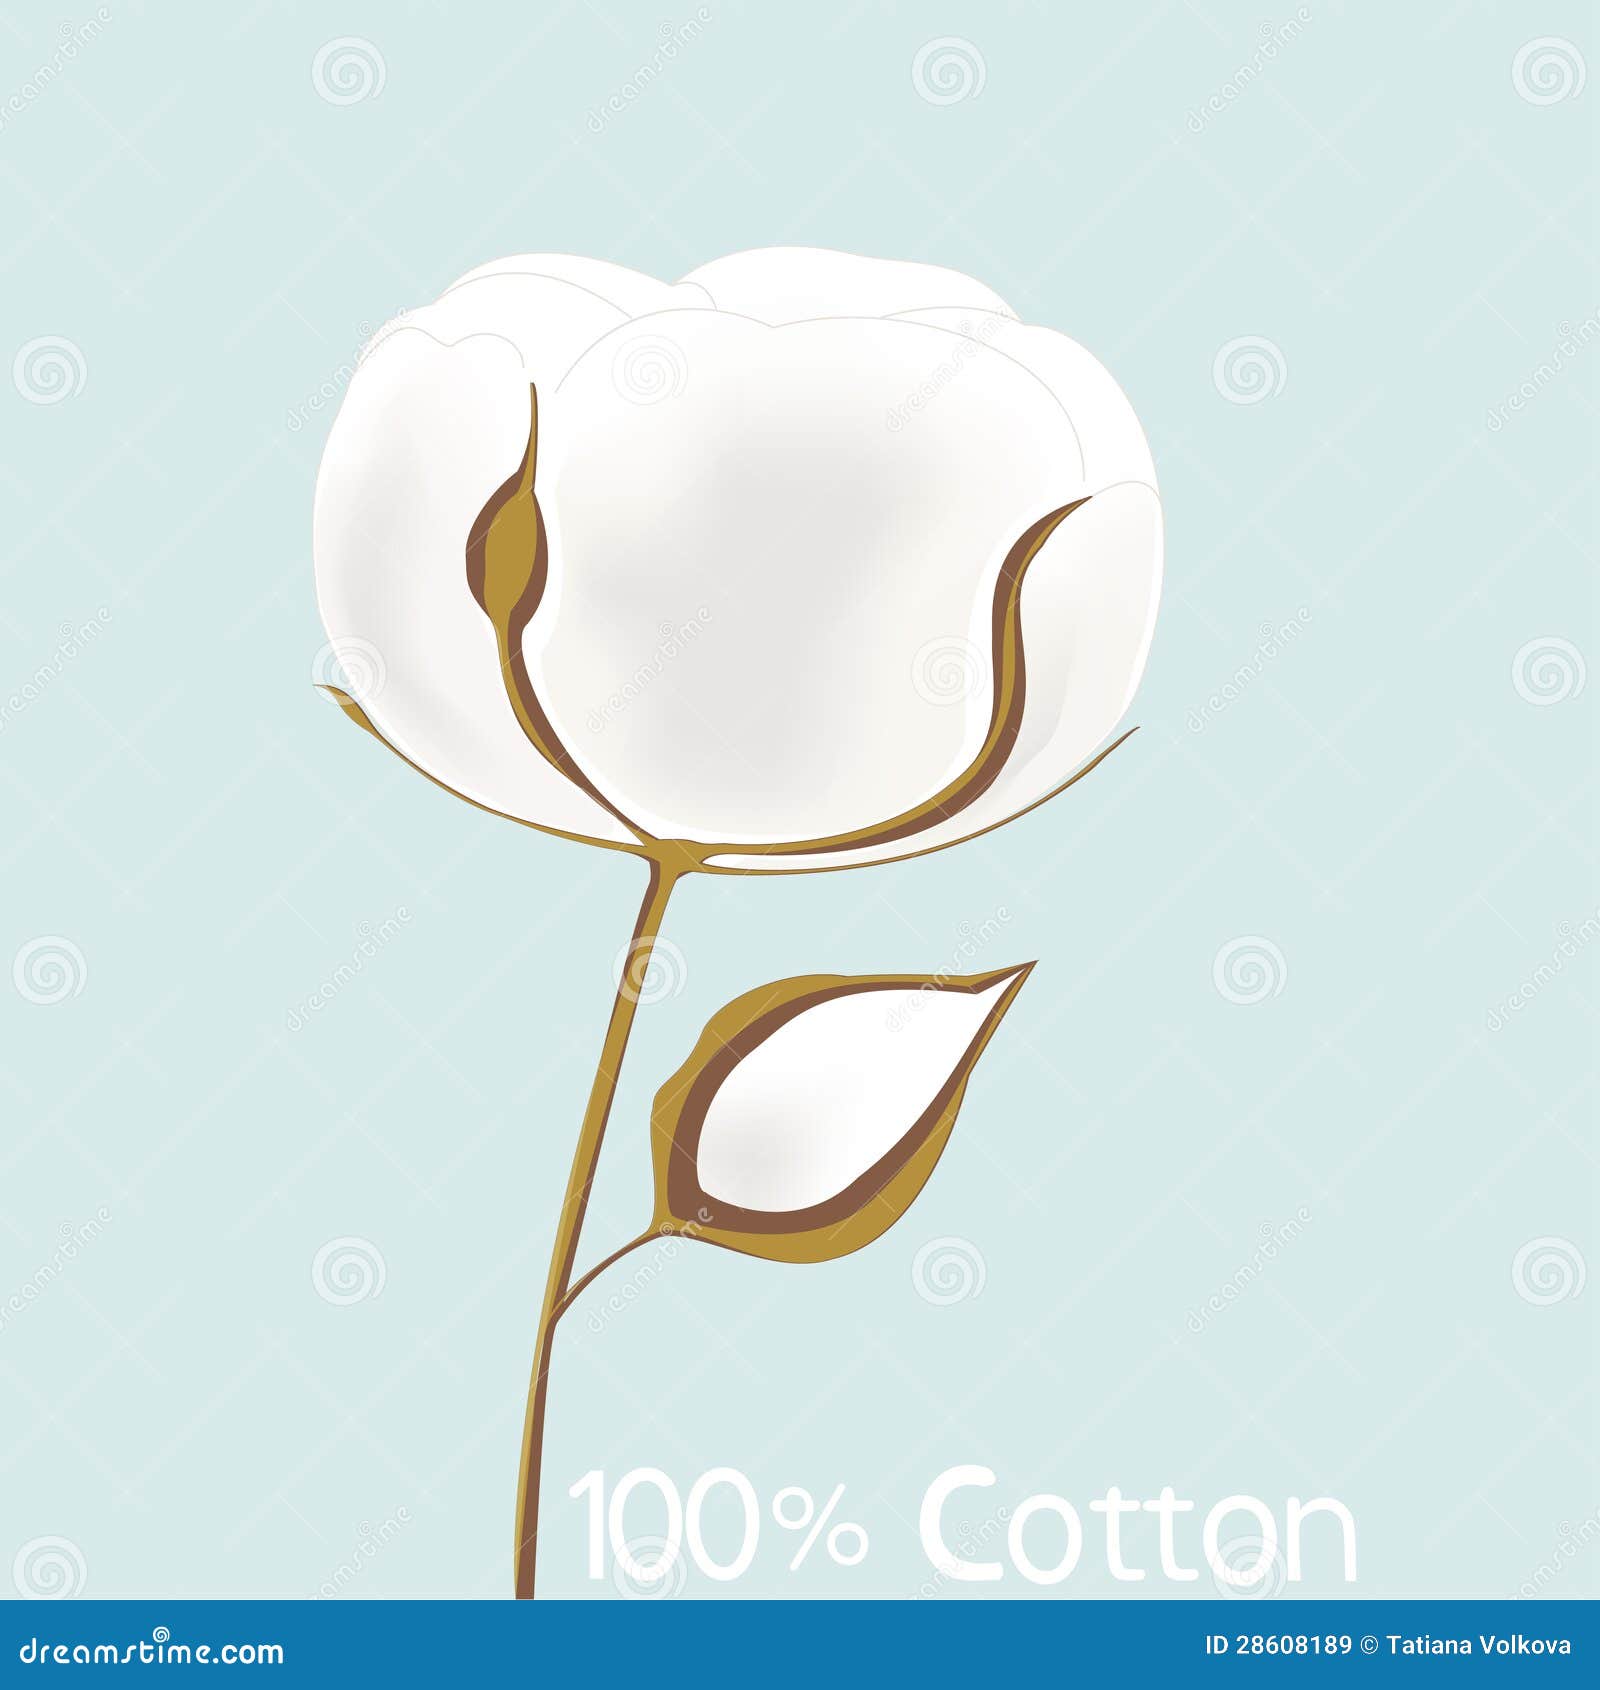 Cotton stock vector. Illustration of leaf, boll, branch - 28608189